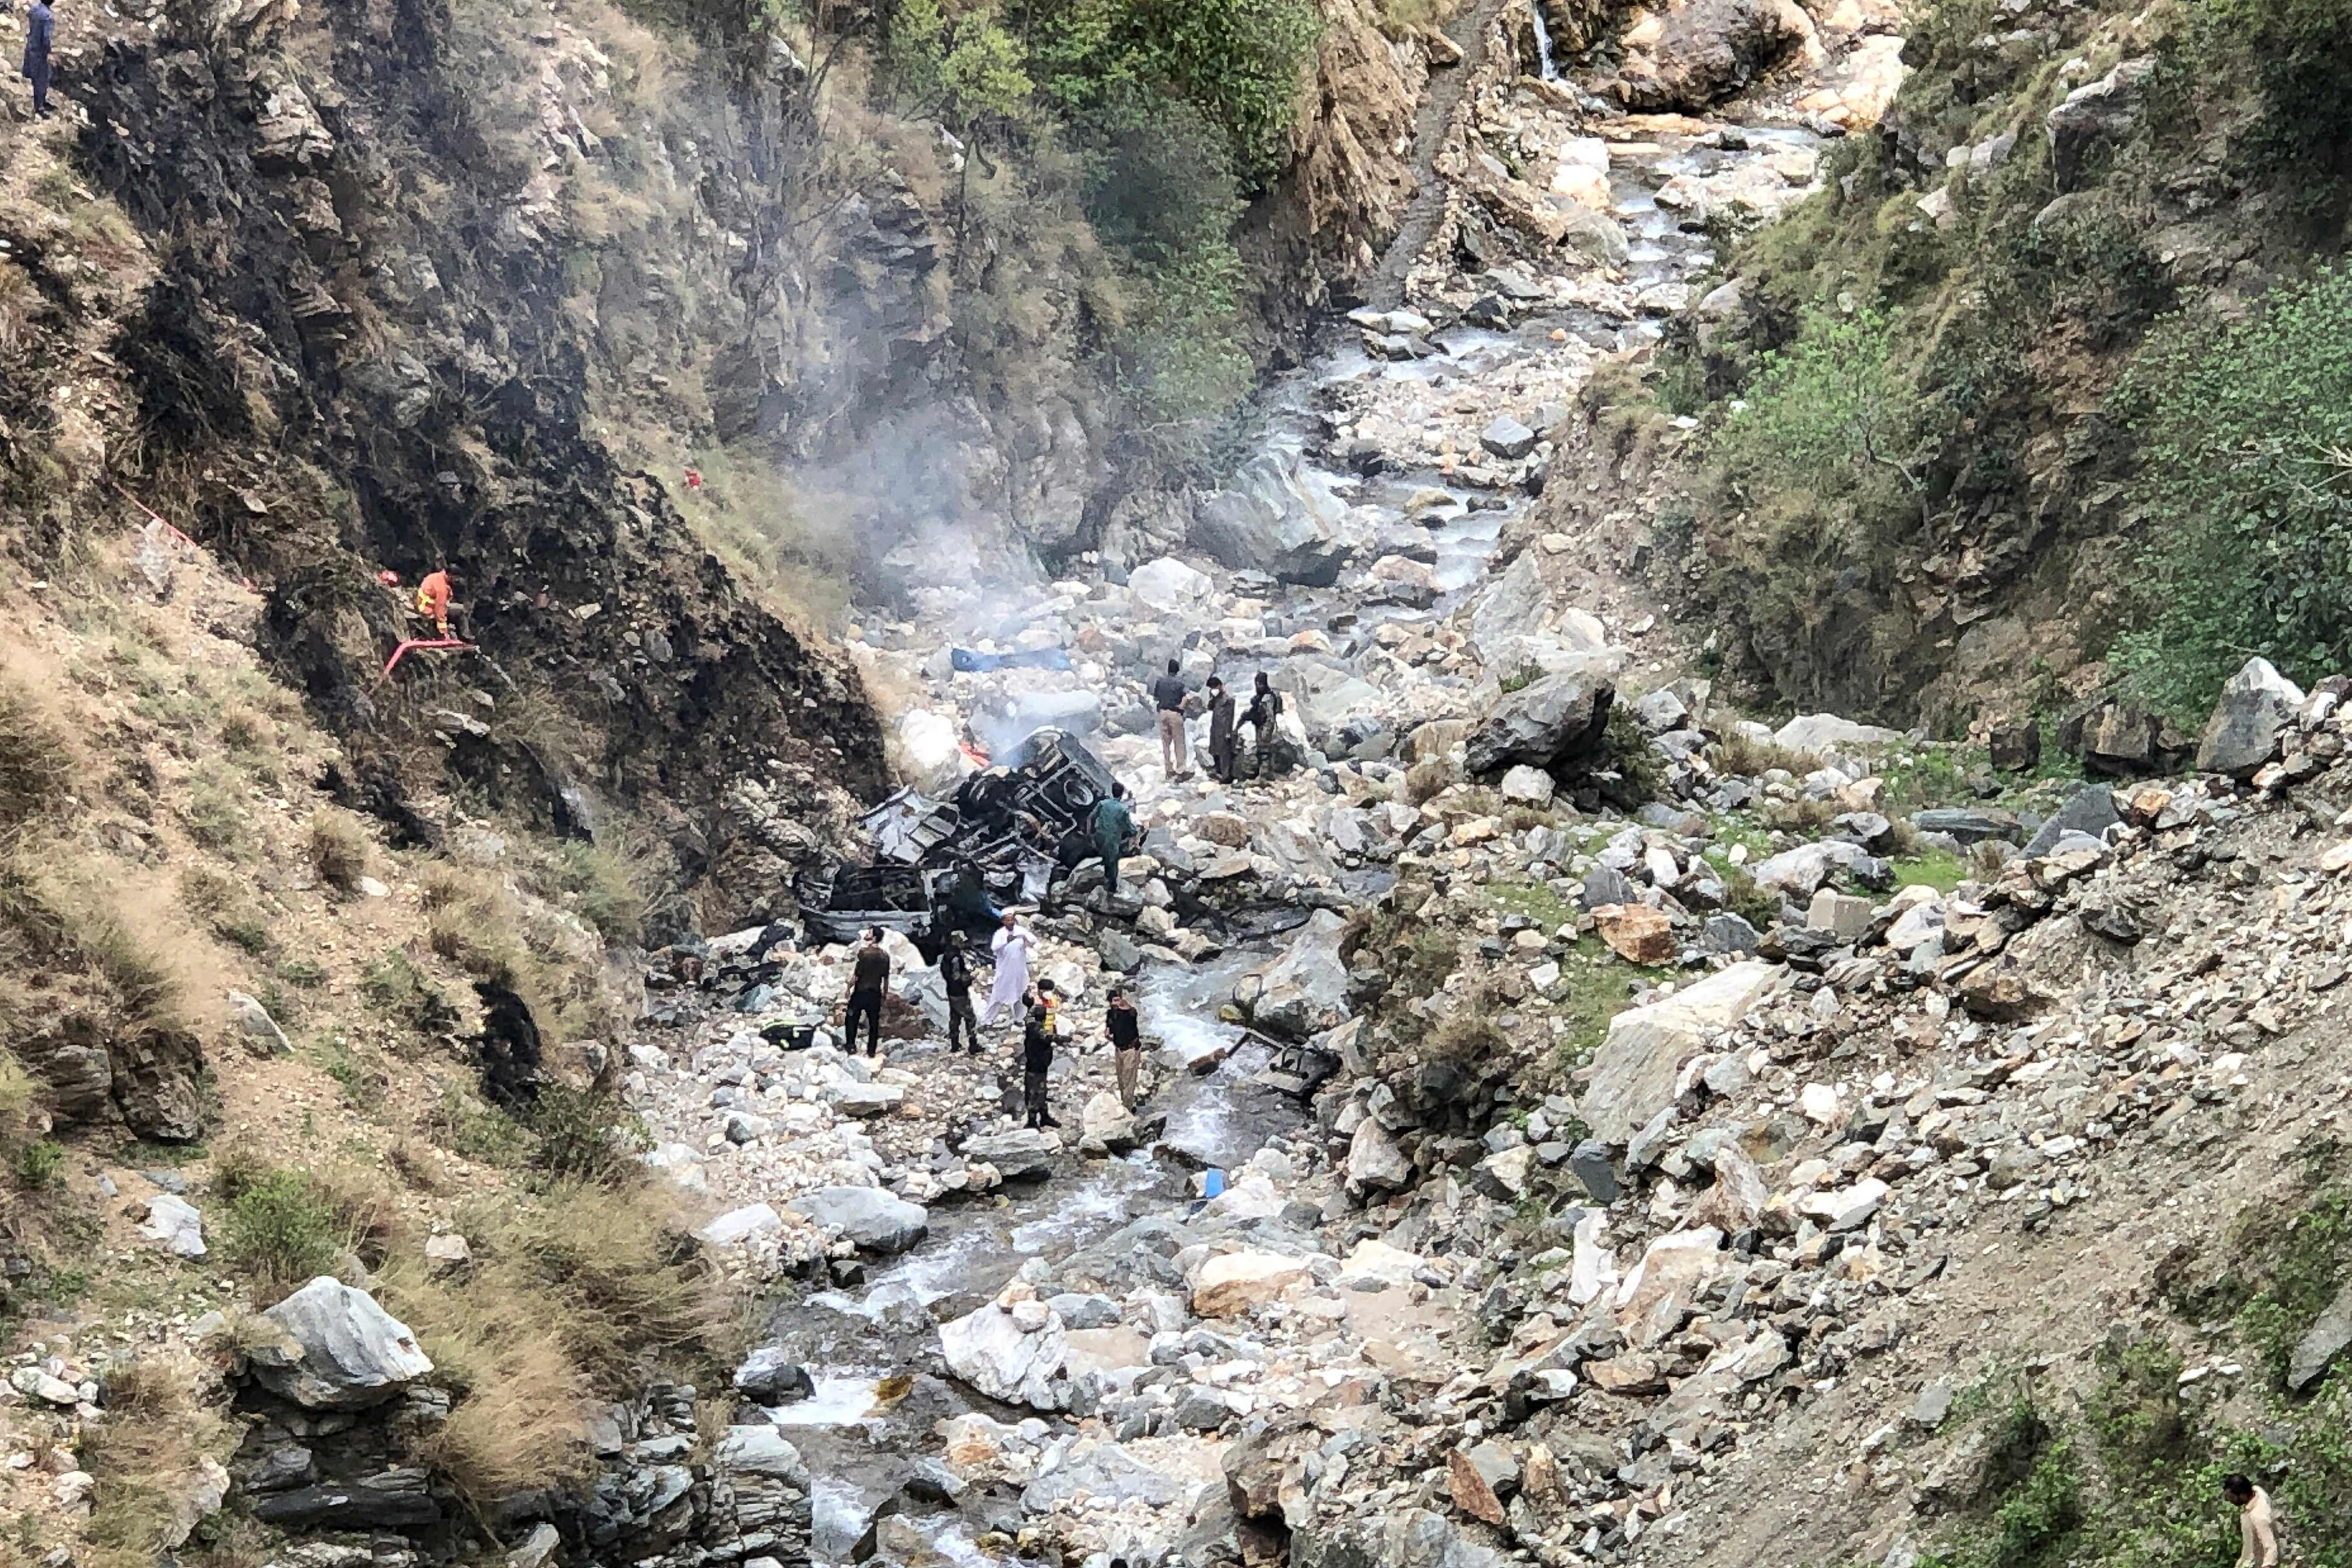 Security officials inspect the wreckage of a vehicle which was carrying Chinese nationals that plunged into a deep ravine off the mountainous Karakoram Highway after a suicide attack near Besham city in the Shangla district of Khyber Pakhtunkhwa province, Pakistan, on Tuesday. Photo: AFP